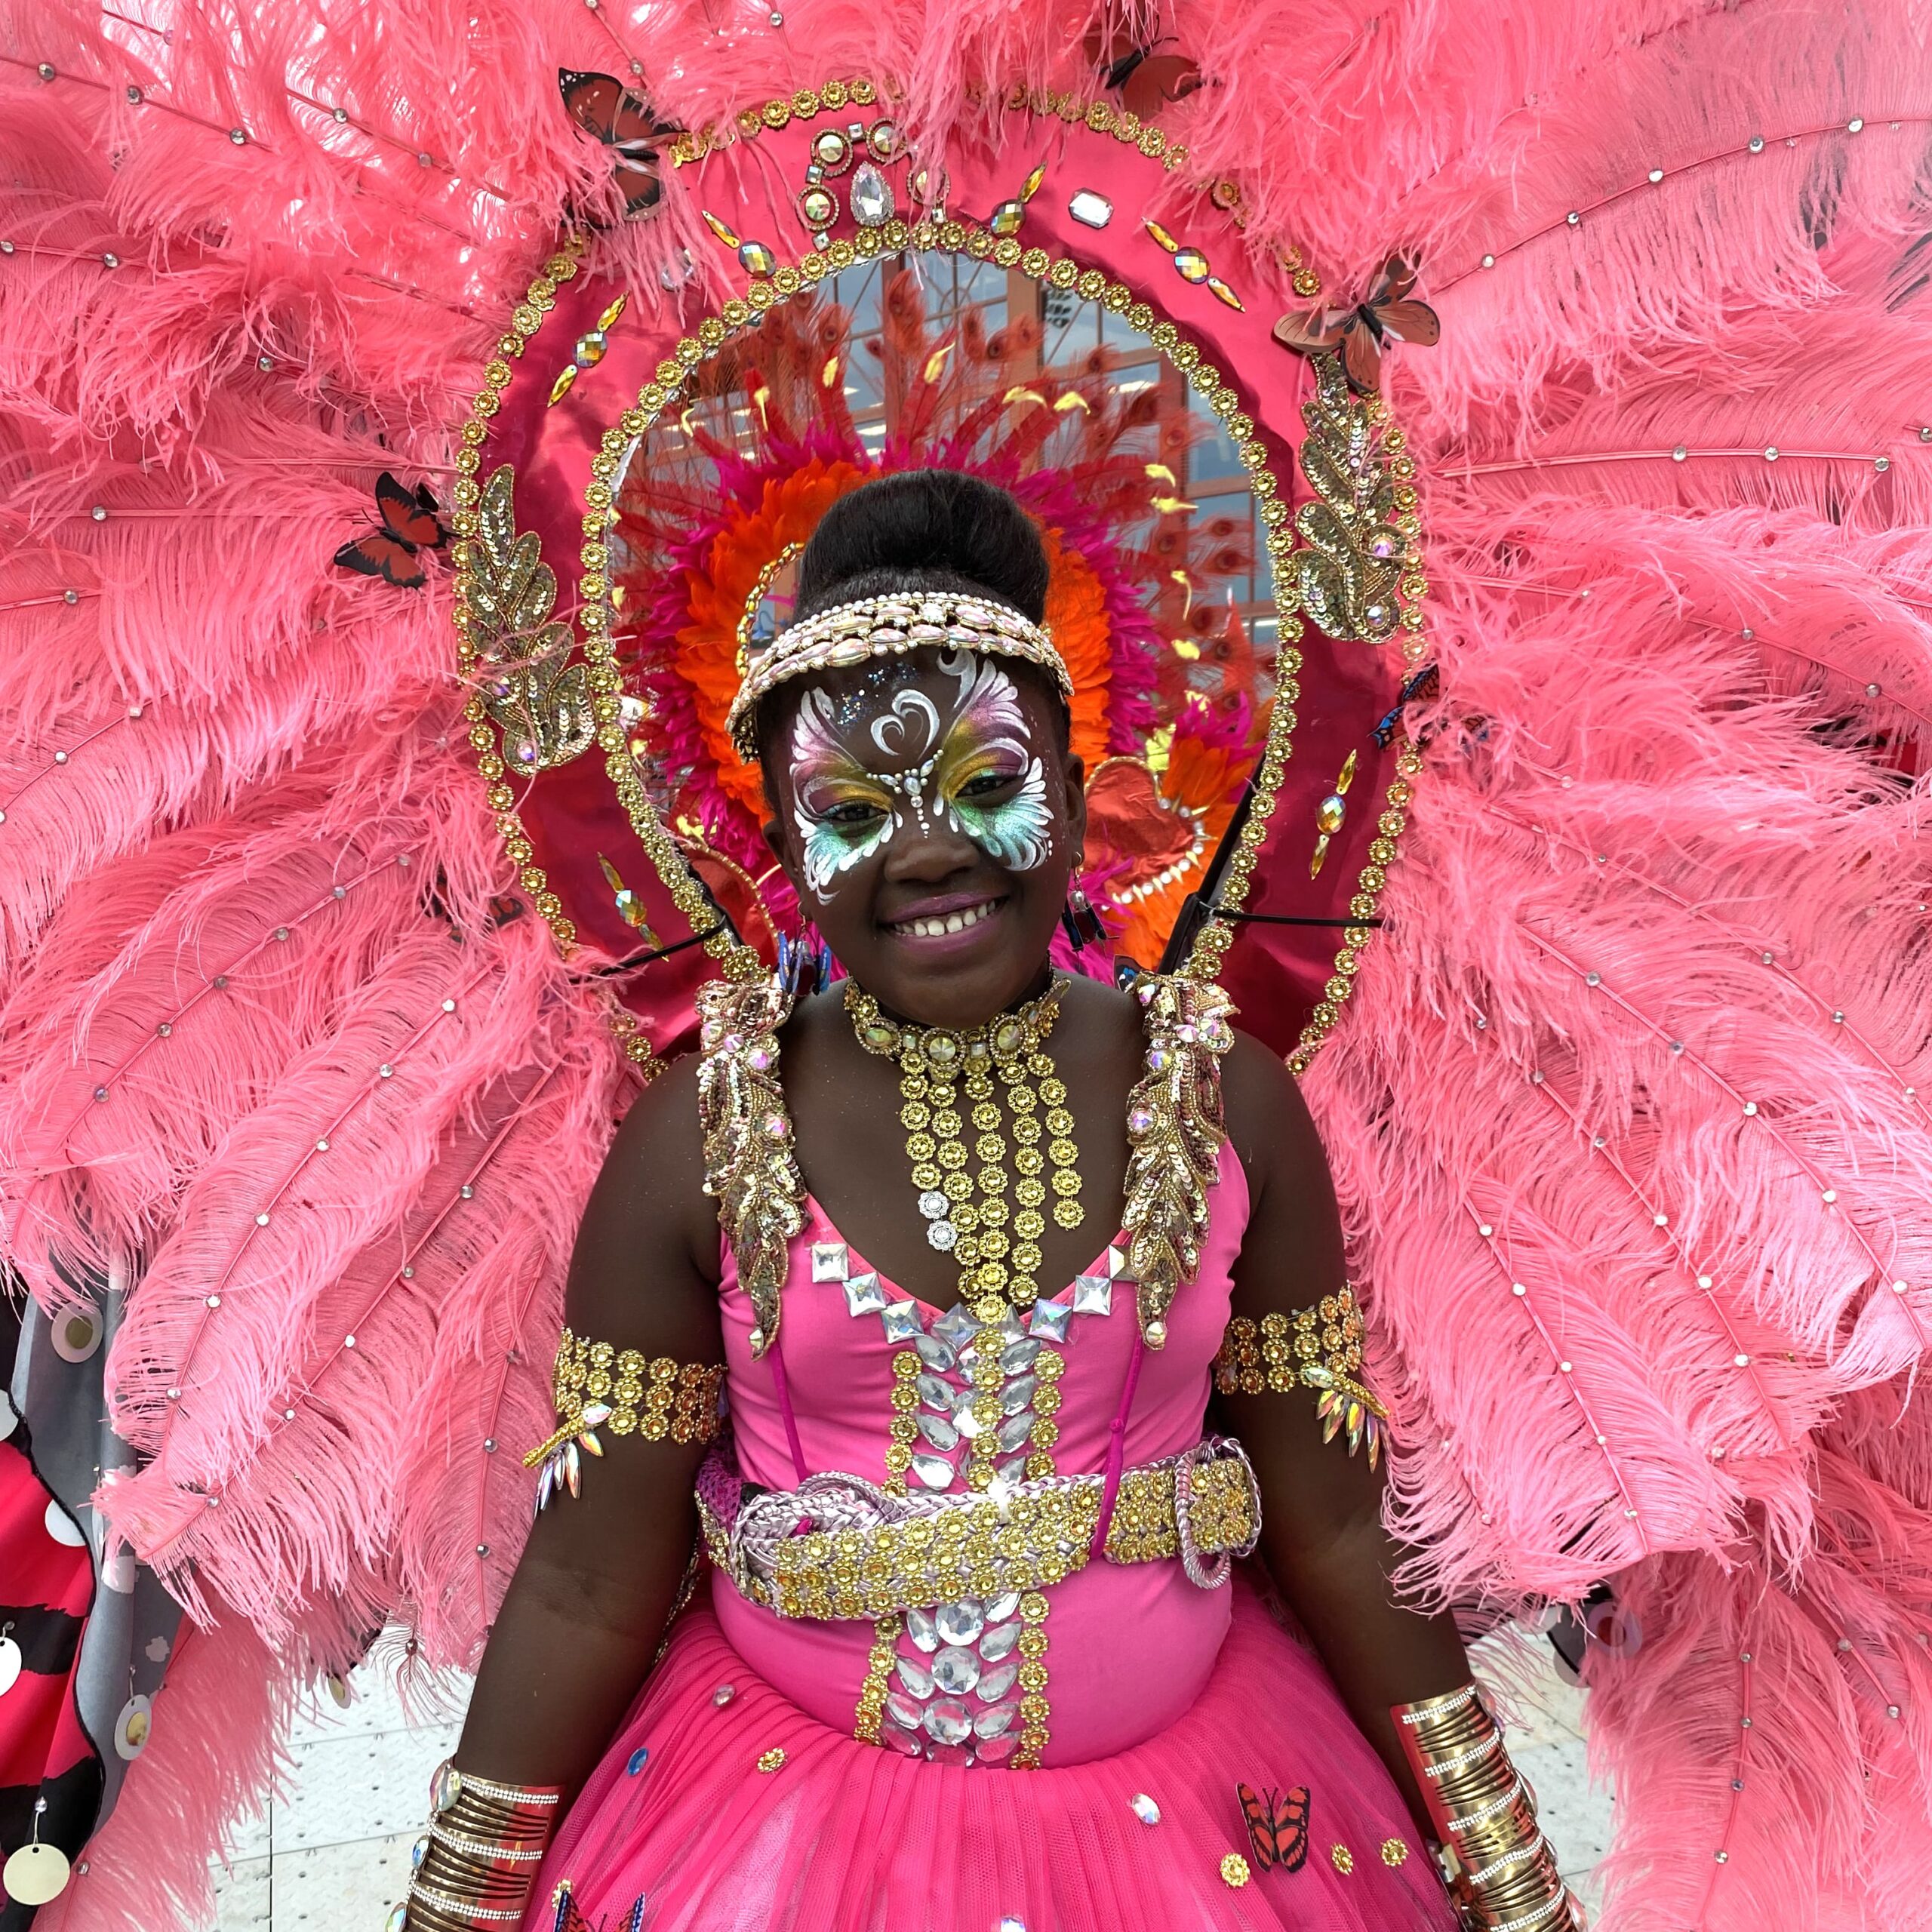 EVENTS - Welcome to Miami Carnival